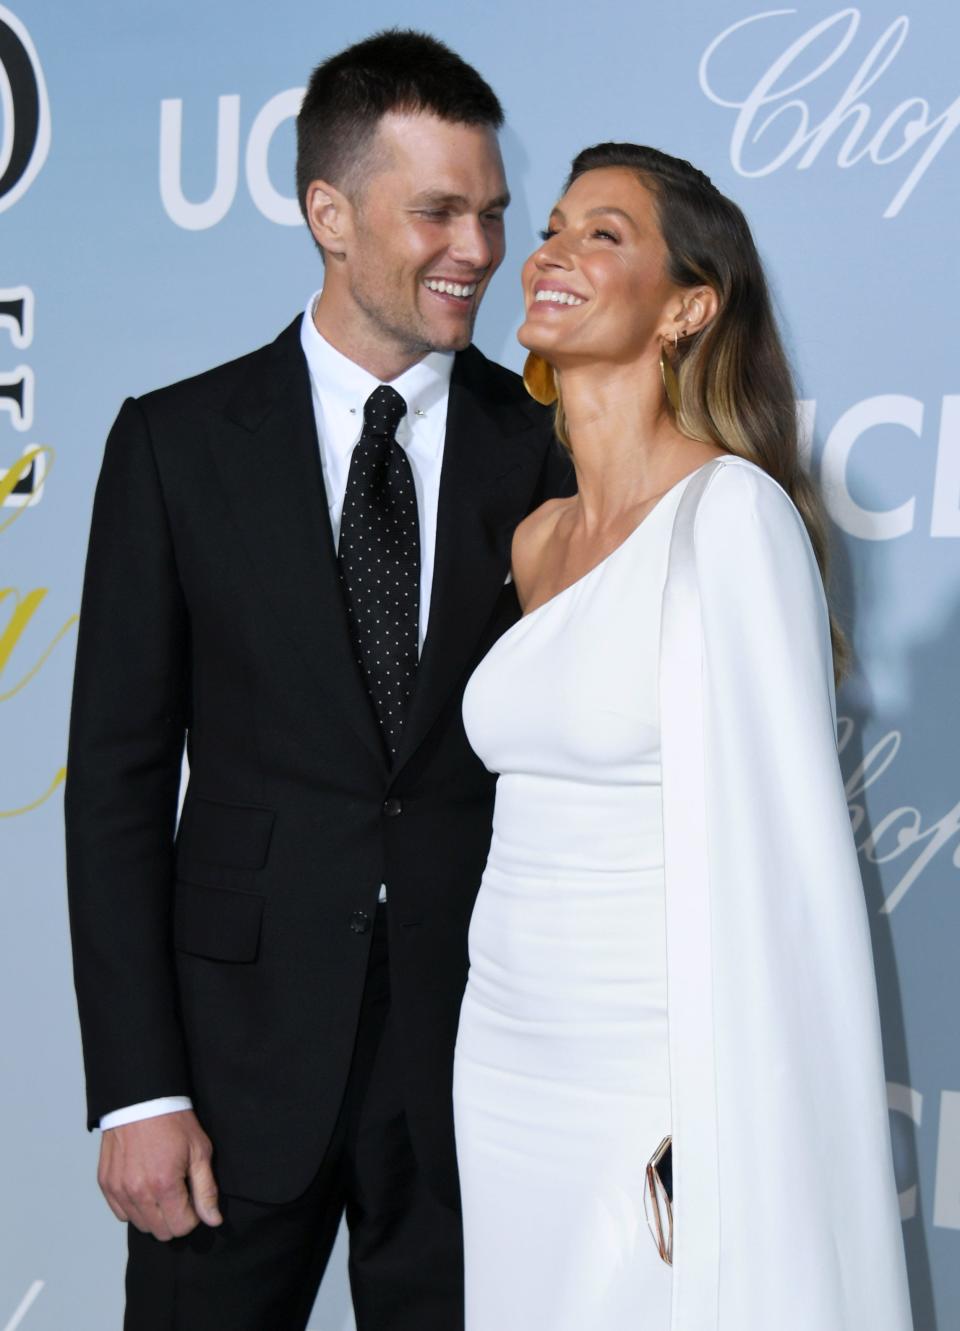 Gisele Bündchen and Tom Brady at a Hollywood event